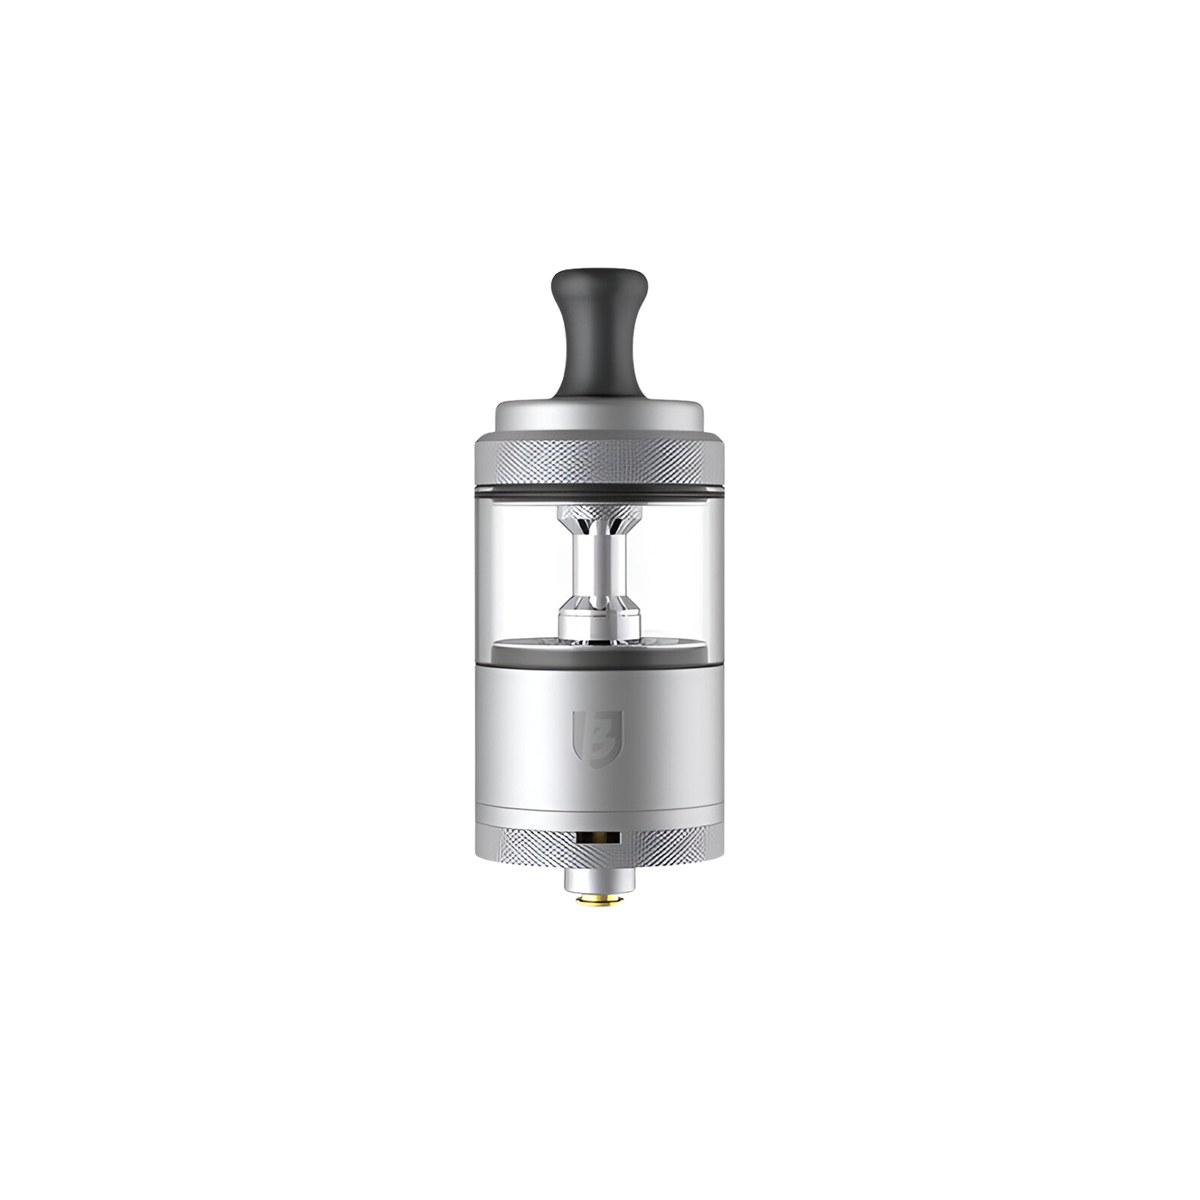 Vandy Vape Bskr V3 Mtl Rta Atomizer Replacement Tanks 2 Ml Frosted Grey 